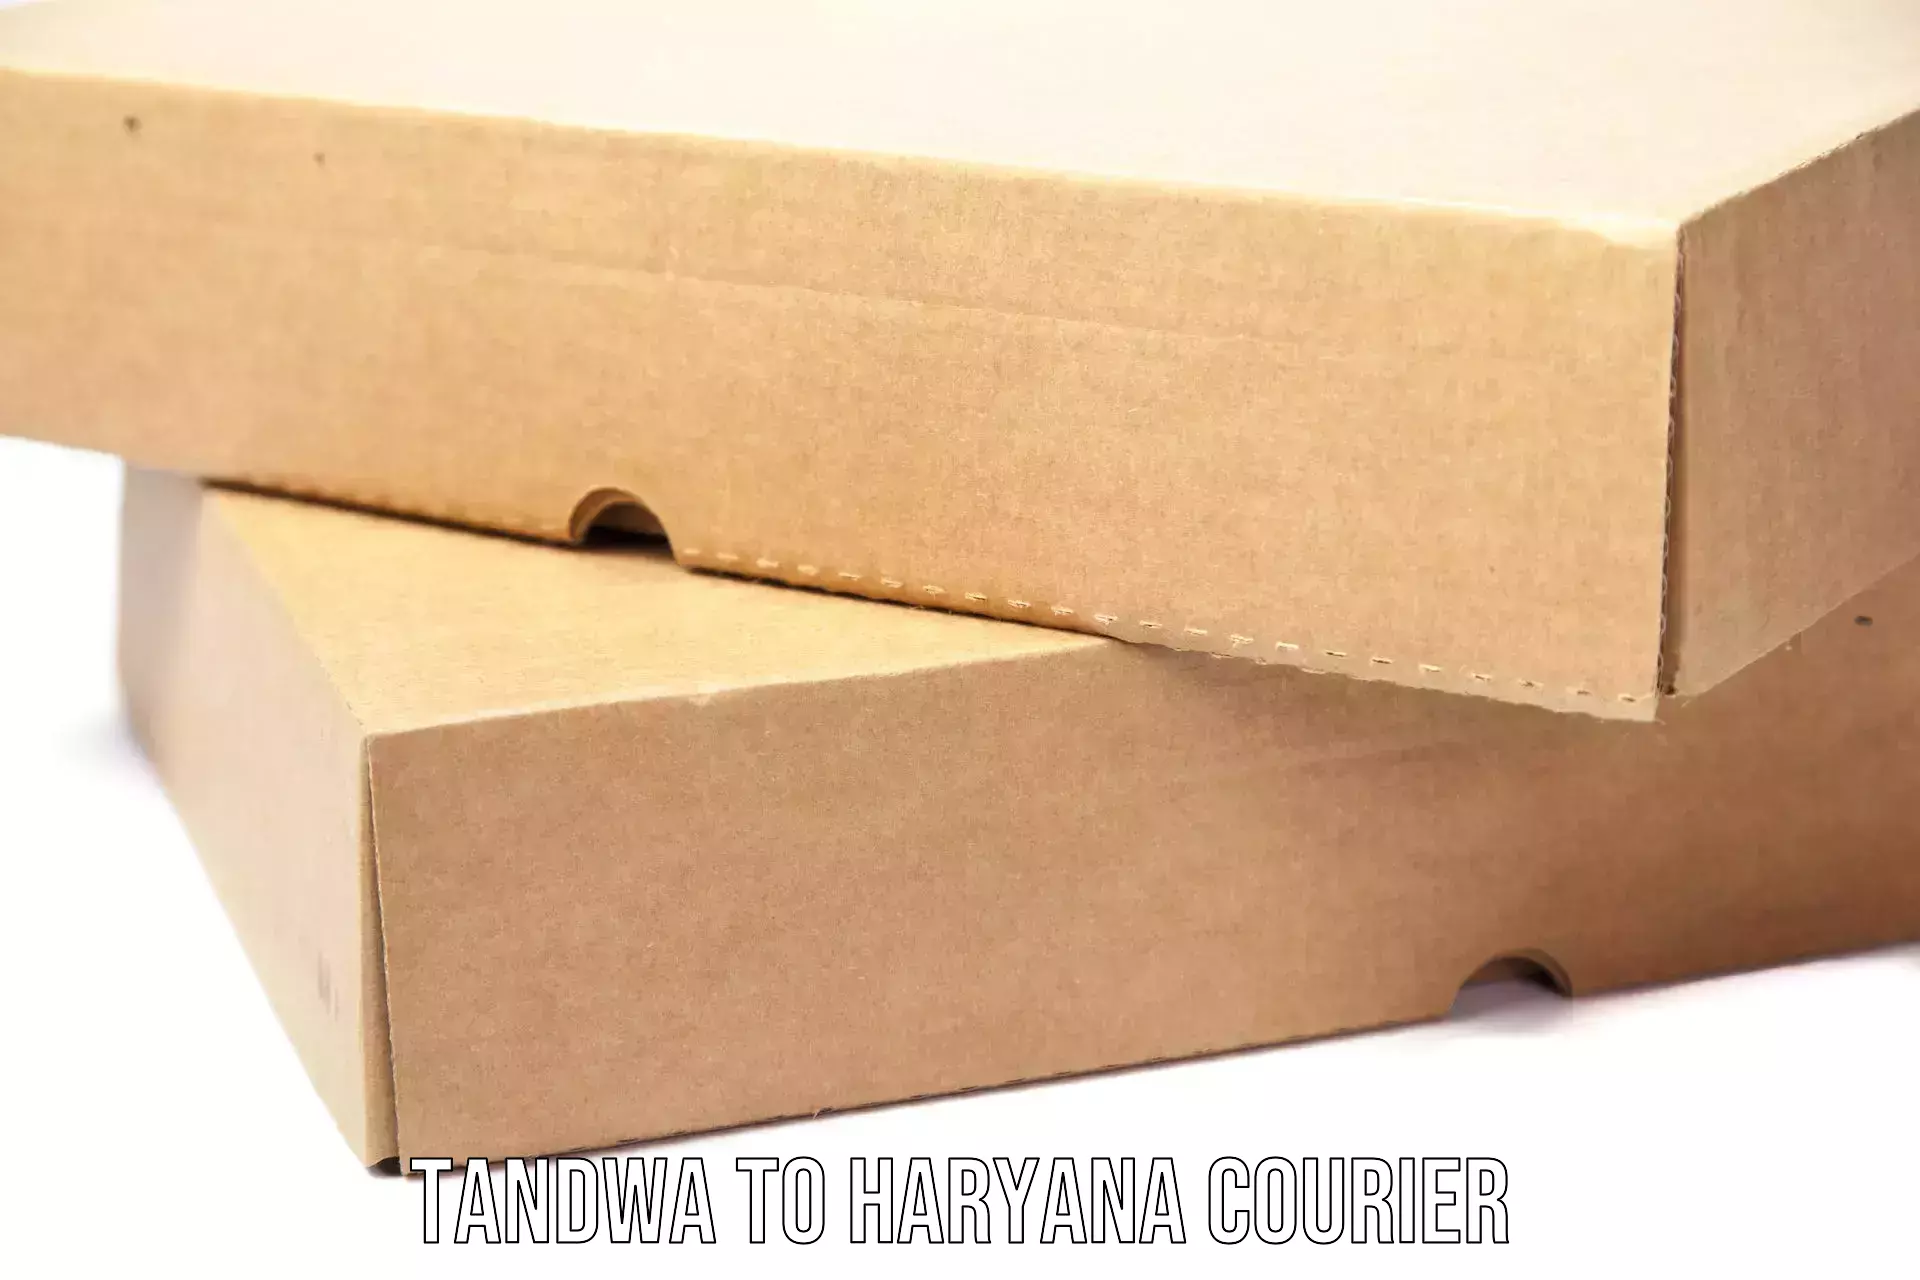 Next-day delivery options Tandwa to Gurgaon